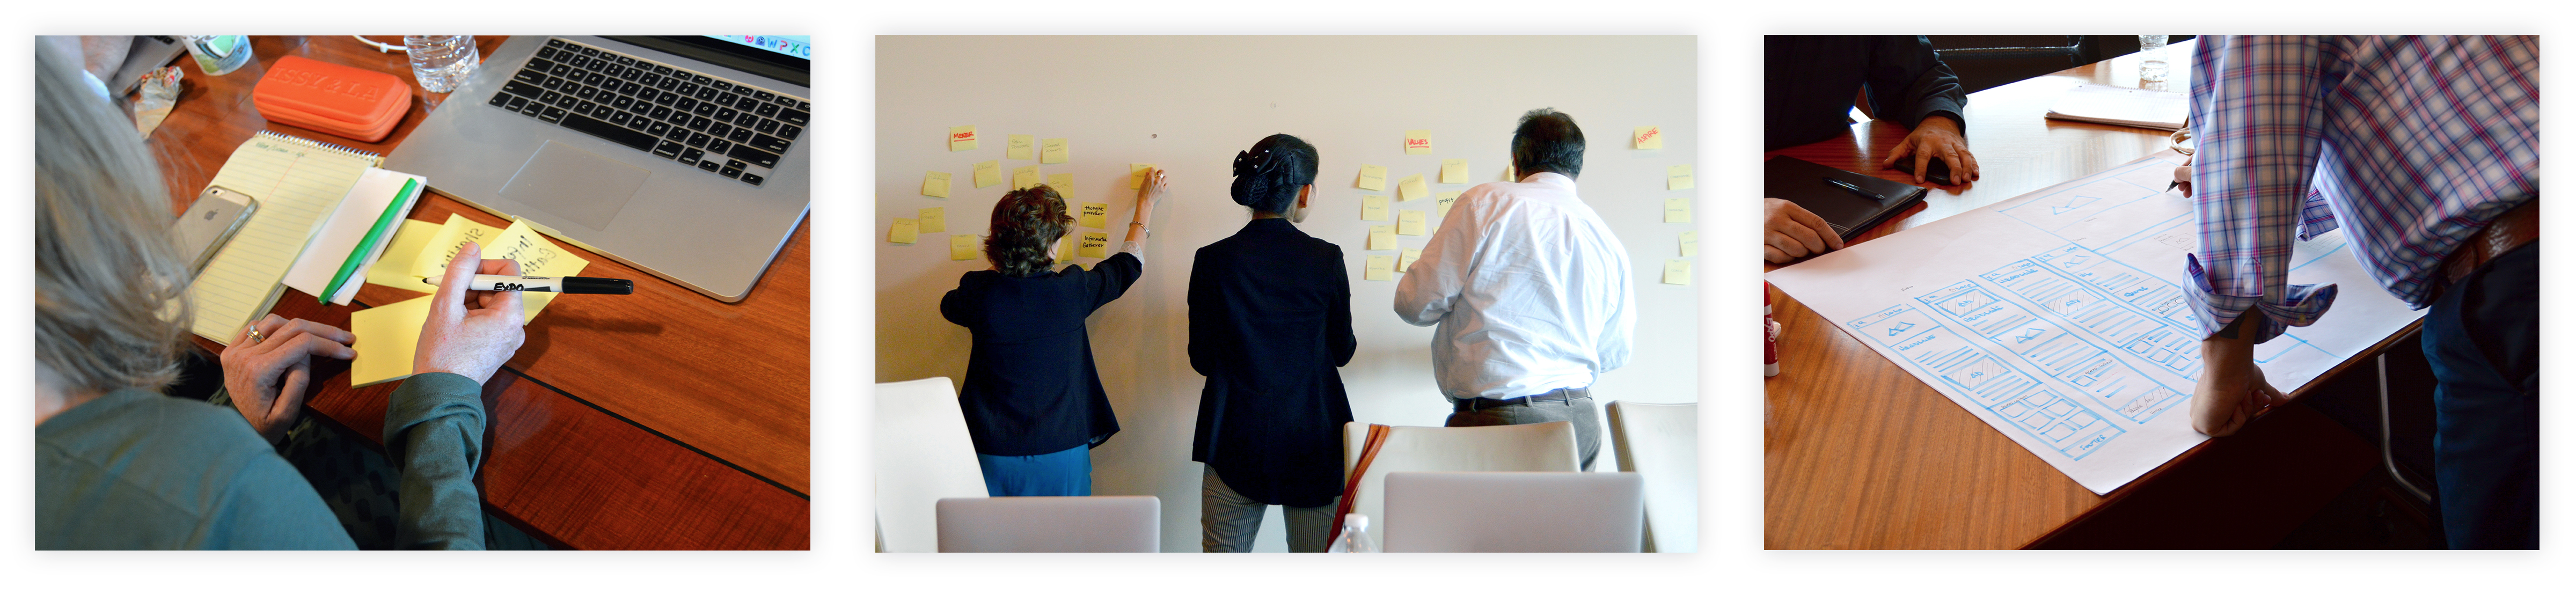 A set of three photos - a person writing on yellow post its with a sharpie, three people adding post its to a group on a white wall, and a person leaning over a blue highlighter sketch of a website